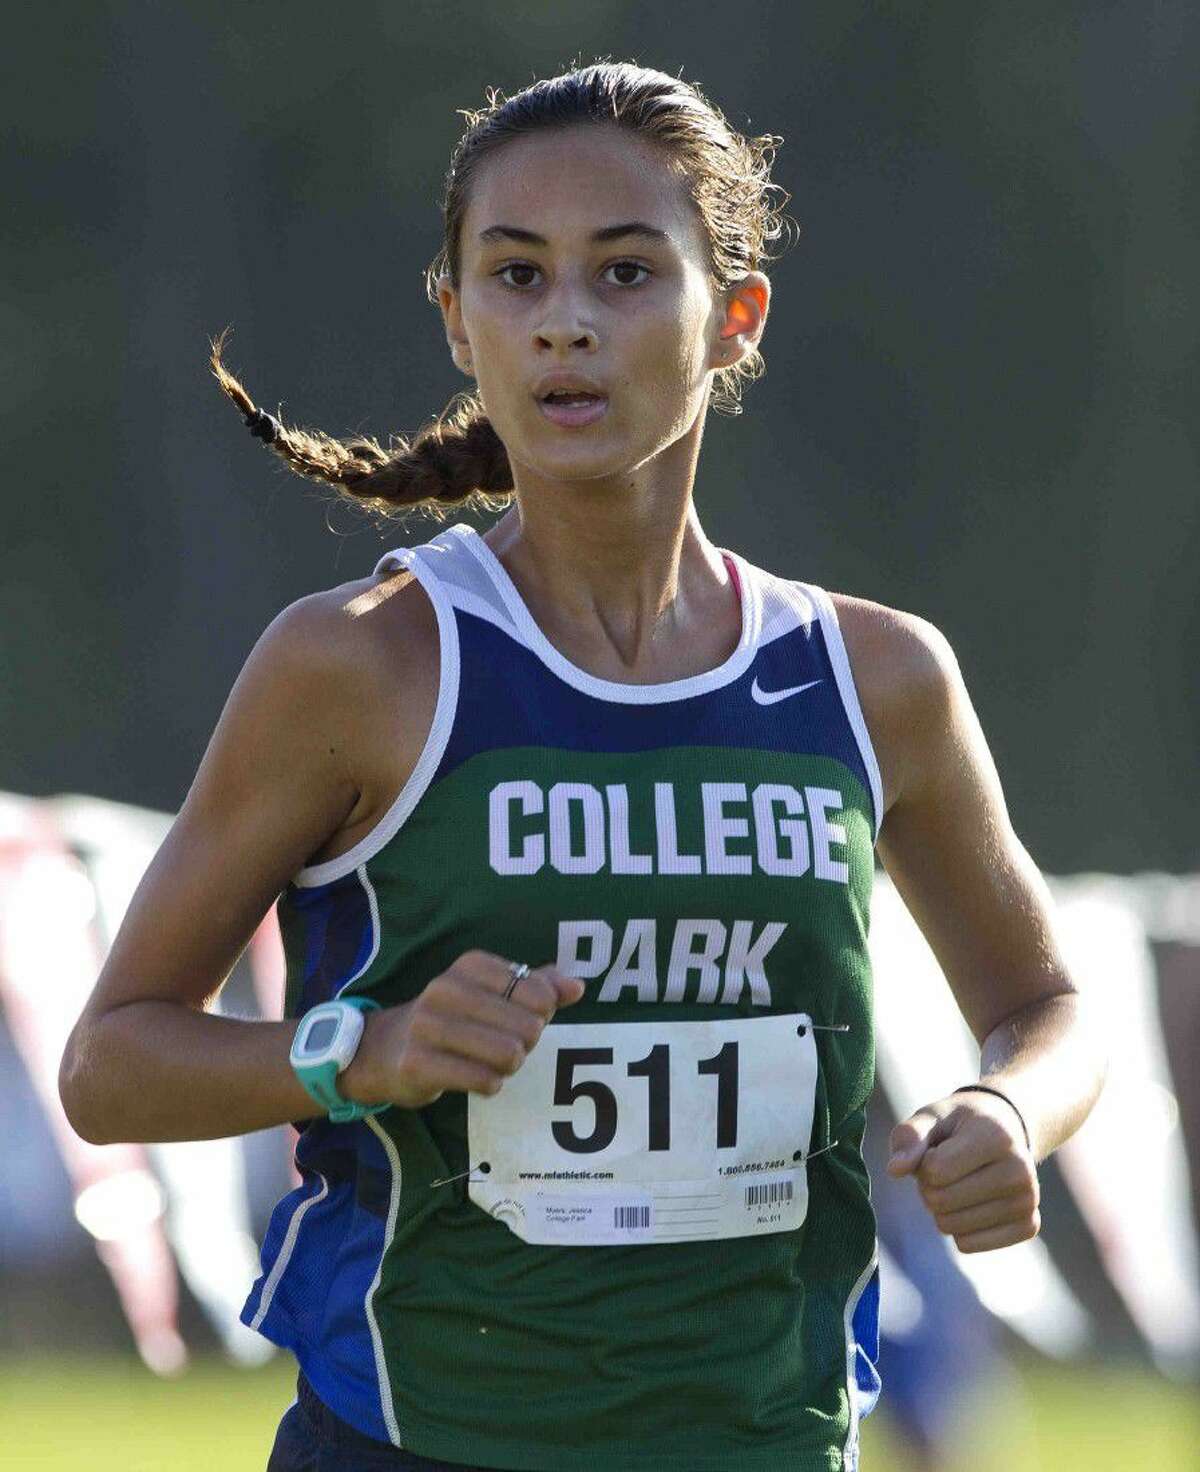 College Park sophomore Jessica Meyers finished second in the varsity girls race during the Oak Ridge Invitational Saturday.